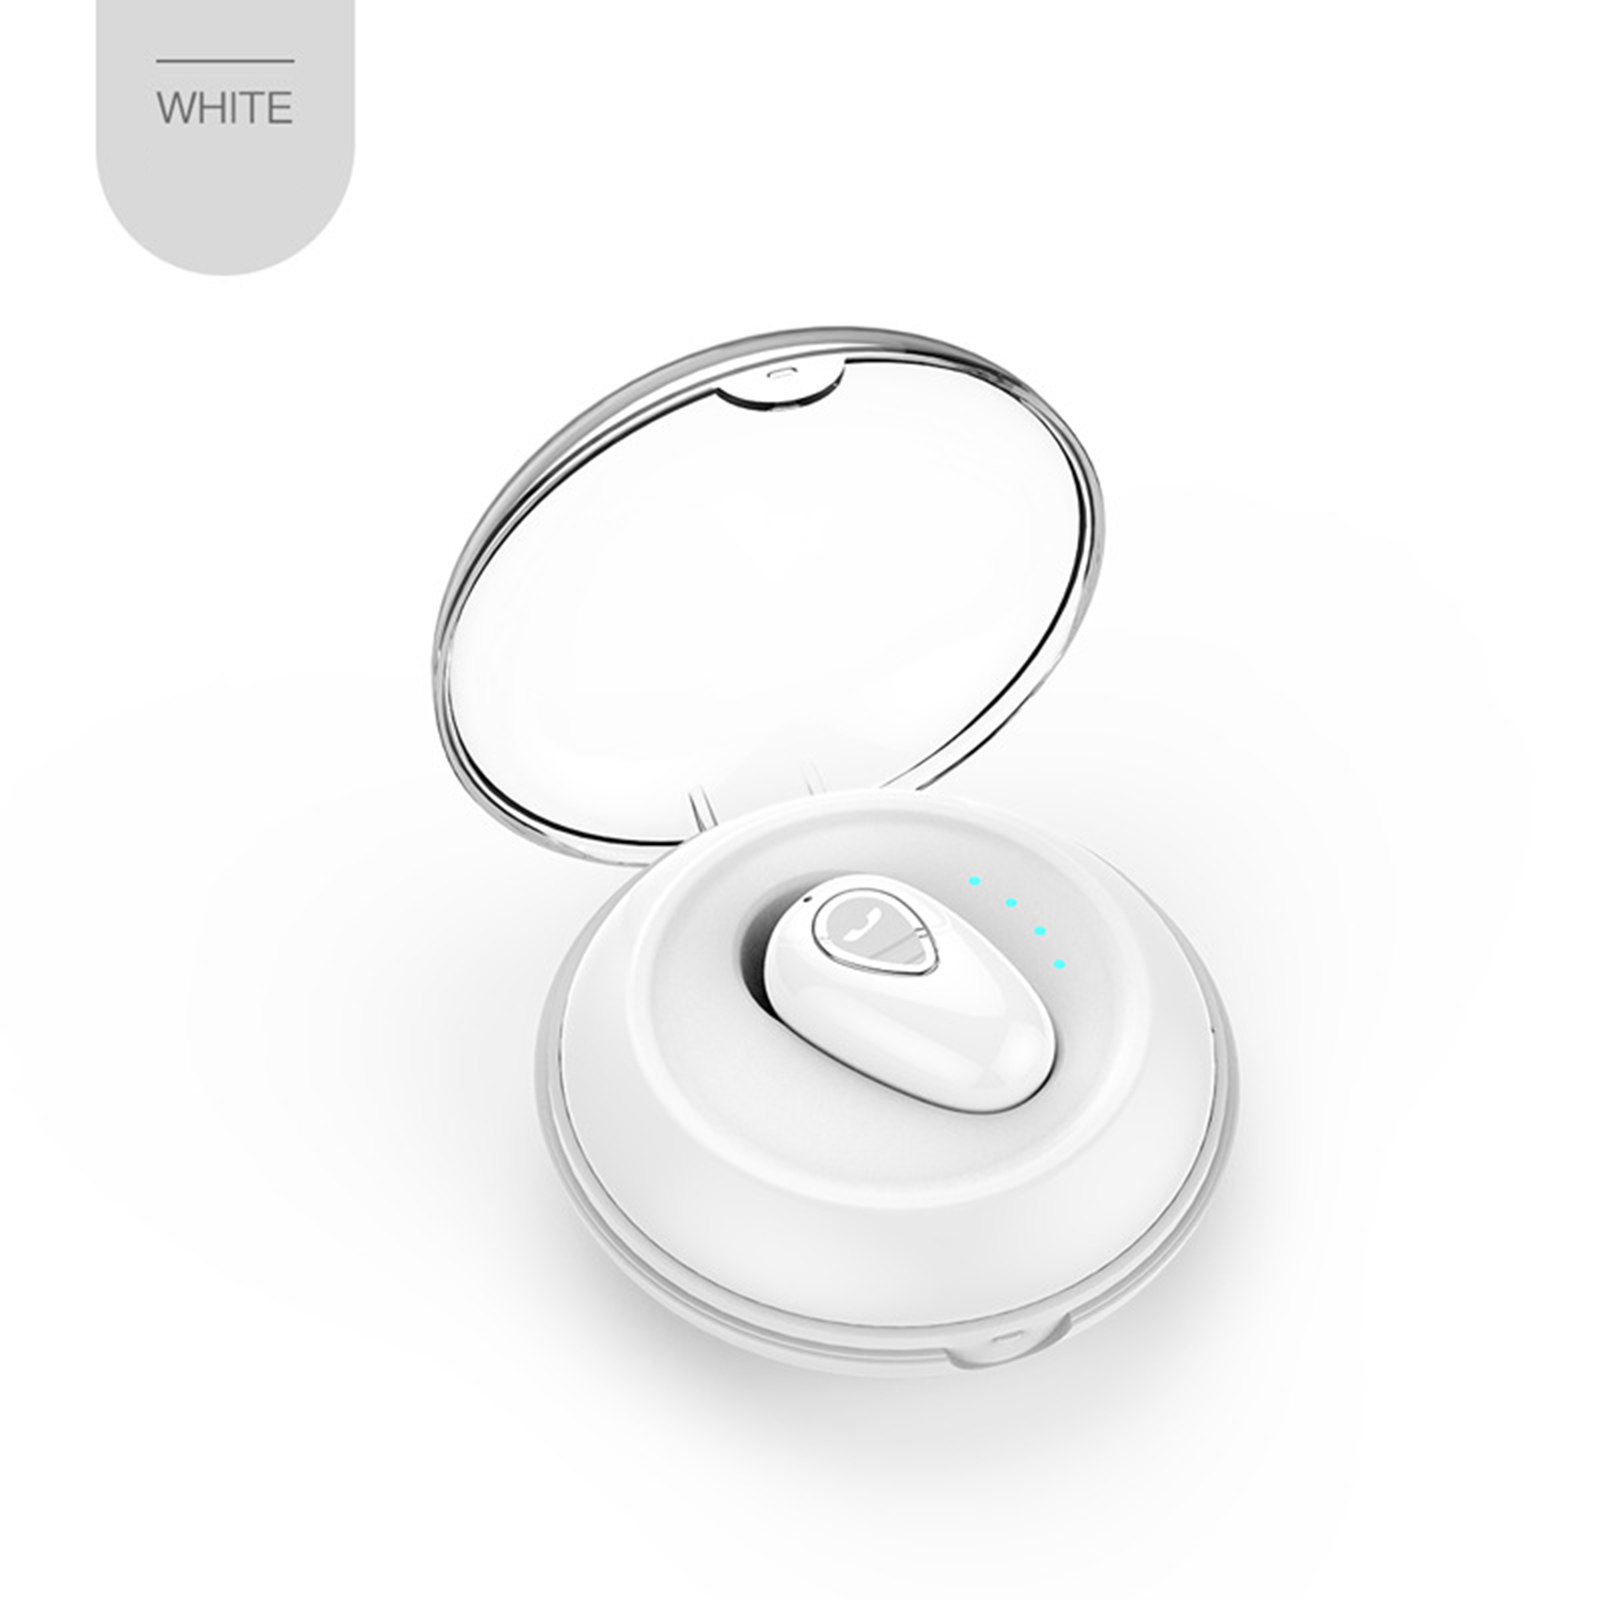 Yx01 Bluetooth-compatible Headset Wireless In-ear Mini Sports Earbuds Invisible Stereo Music Earphone White